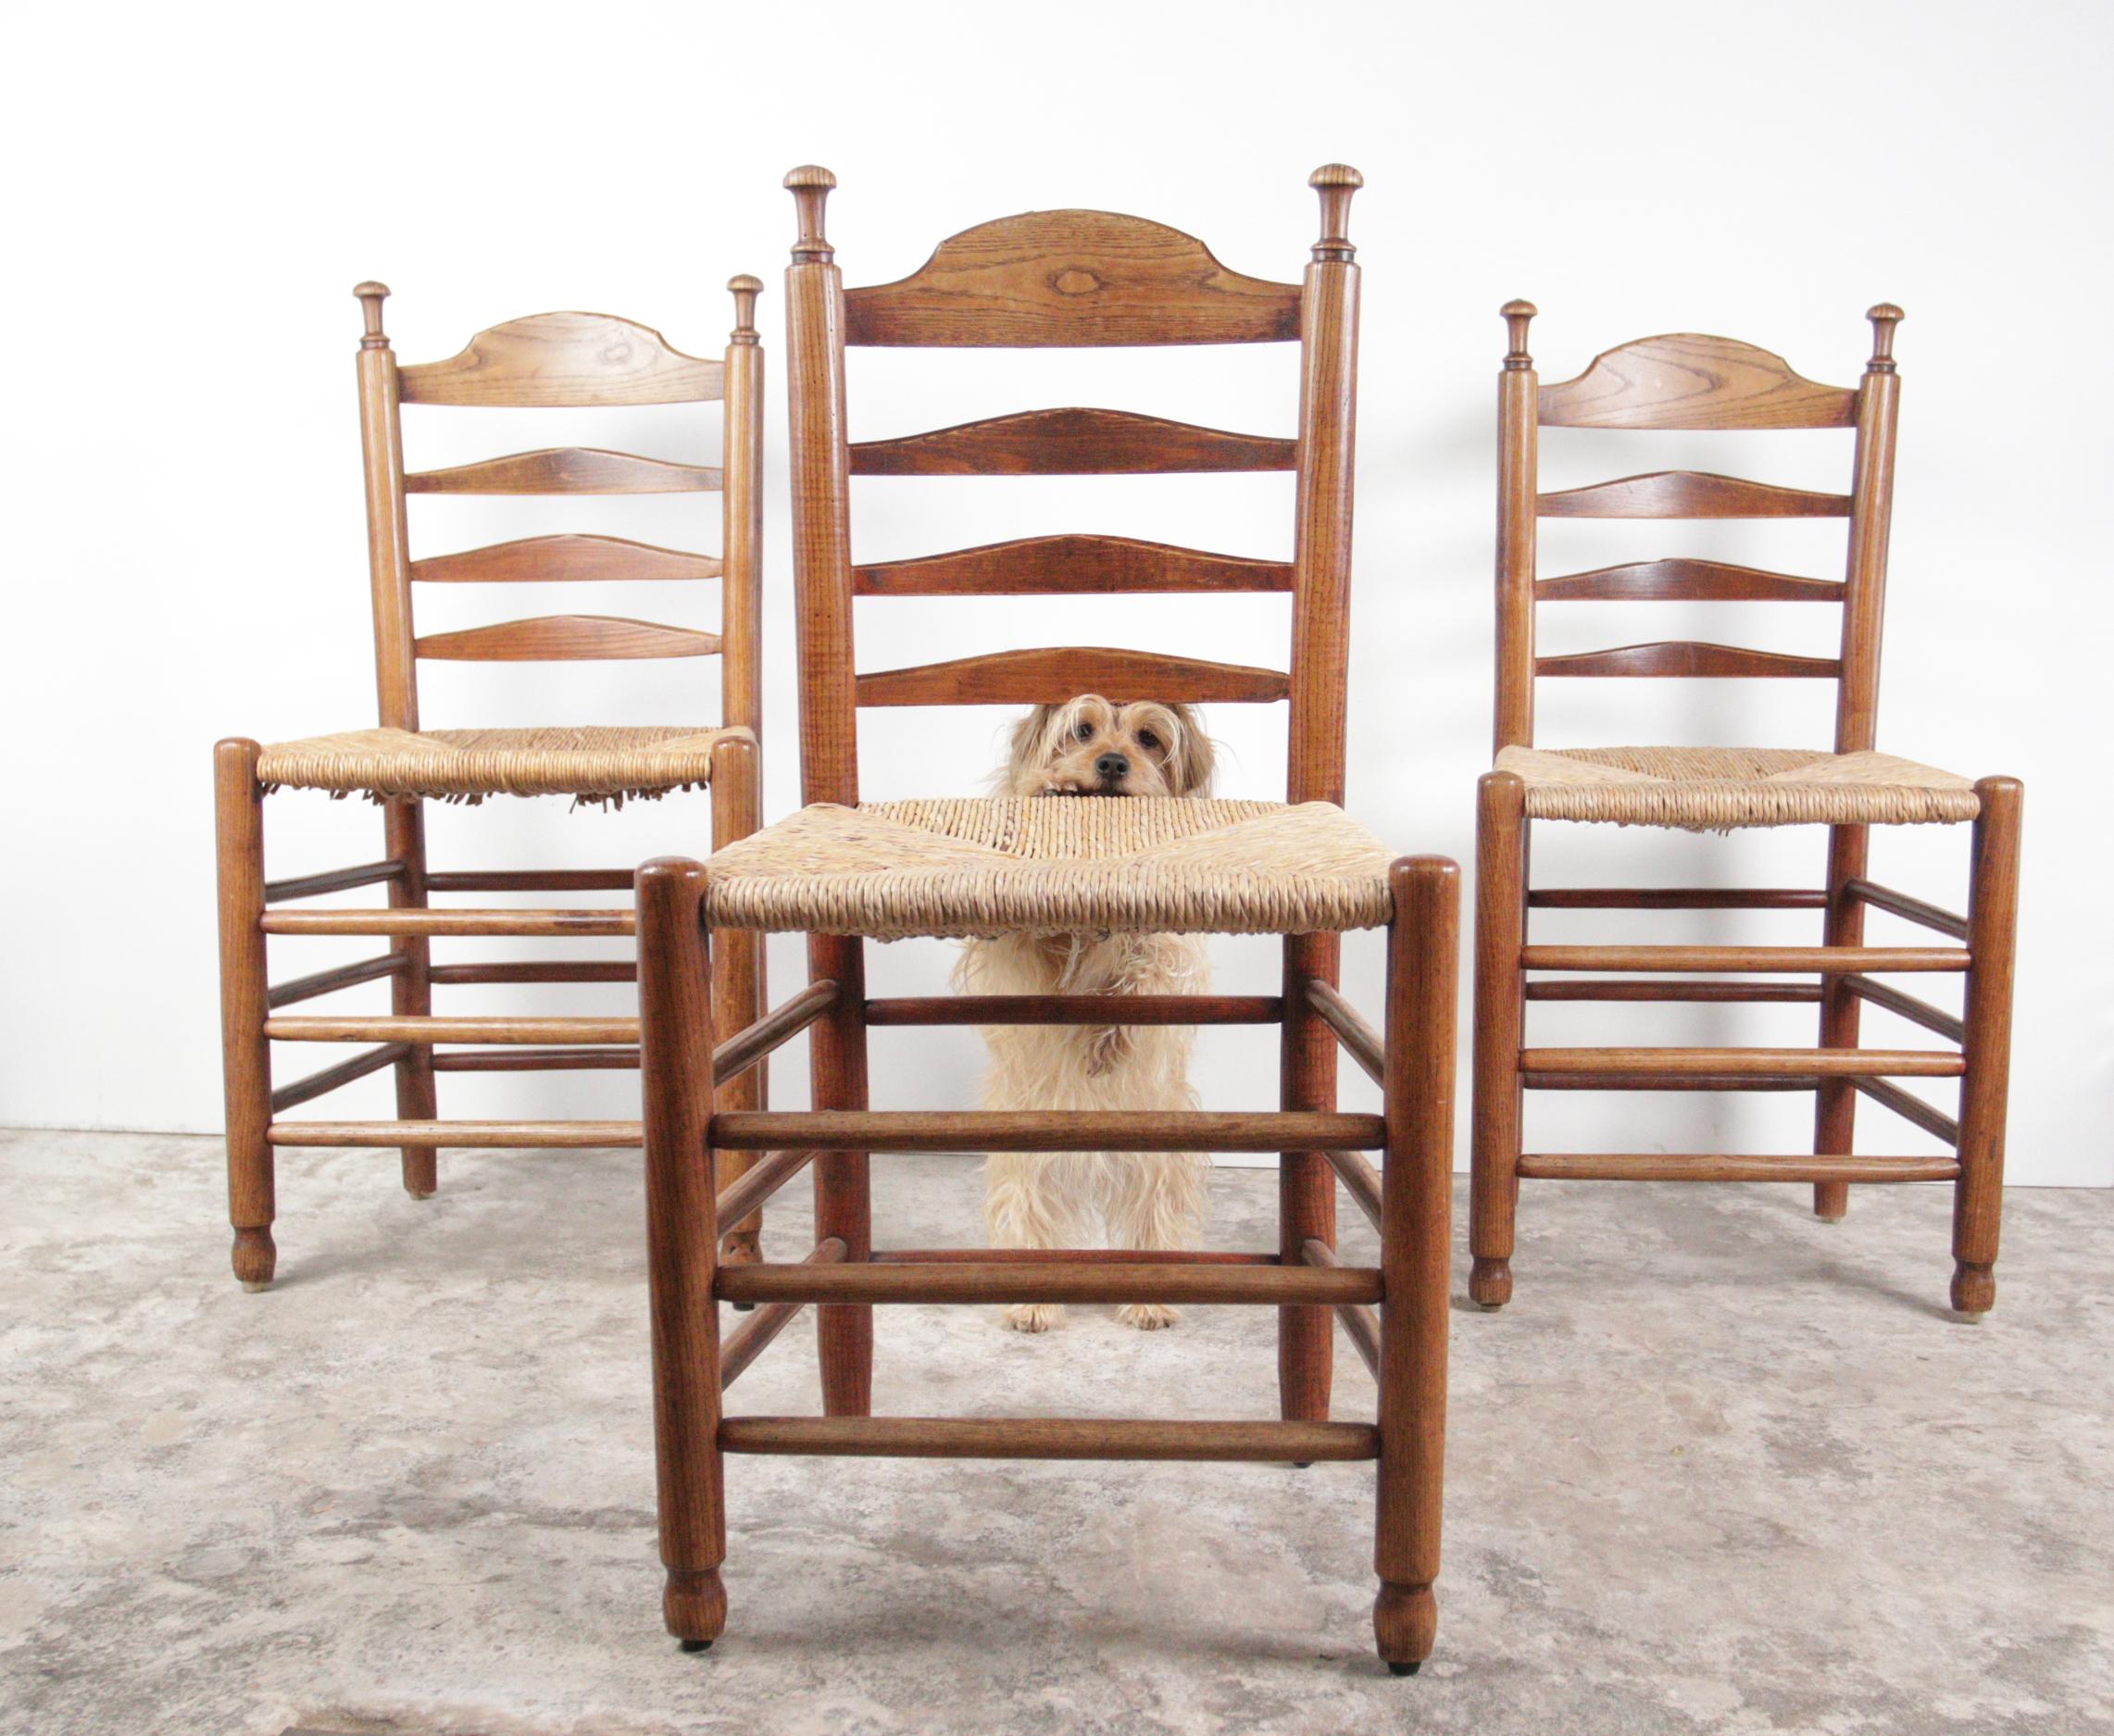 Beautiful chairs from the late 19th century made of solid oak with a wicker woven seat.
Fit perfectly with the style of designers such as Charlotte Perriand and Charles Dudouyt.
They are comfortable and have a very nice warm appearance due to the